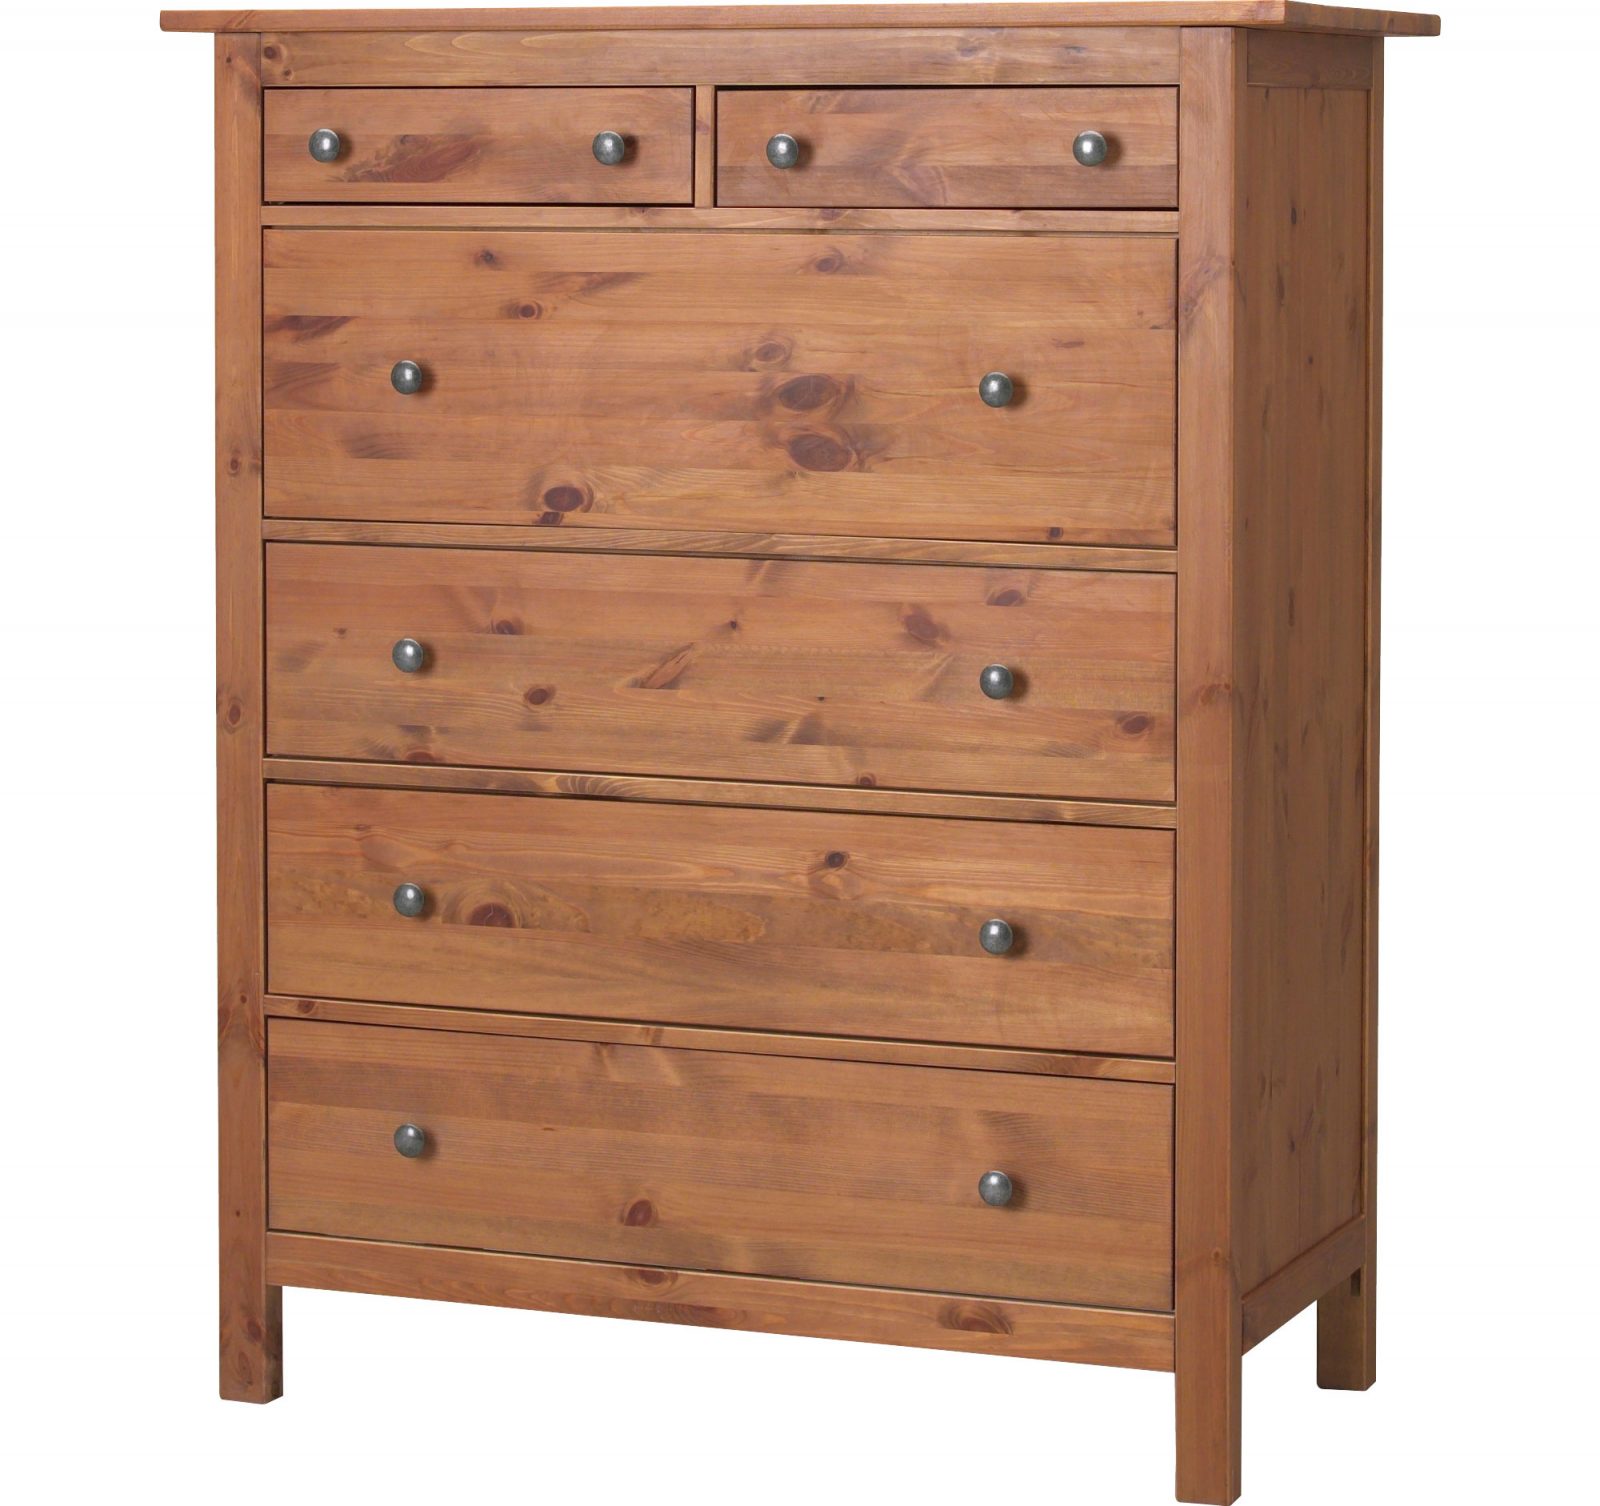 Rustic antique-stained chest of drawers in a rural style, HEMNES.